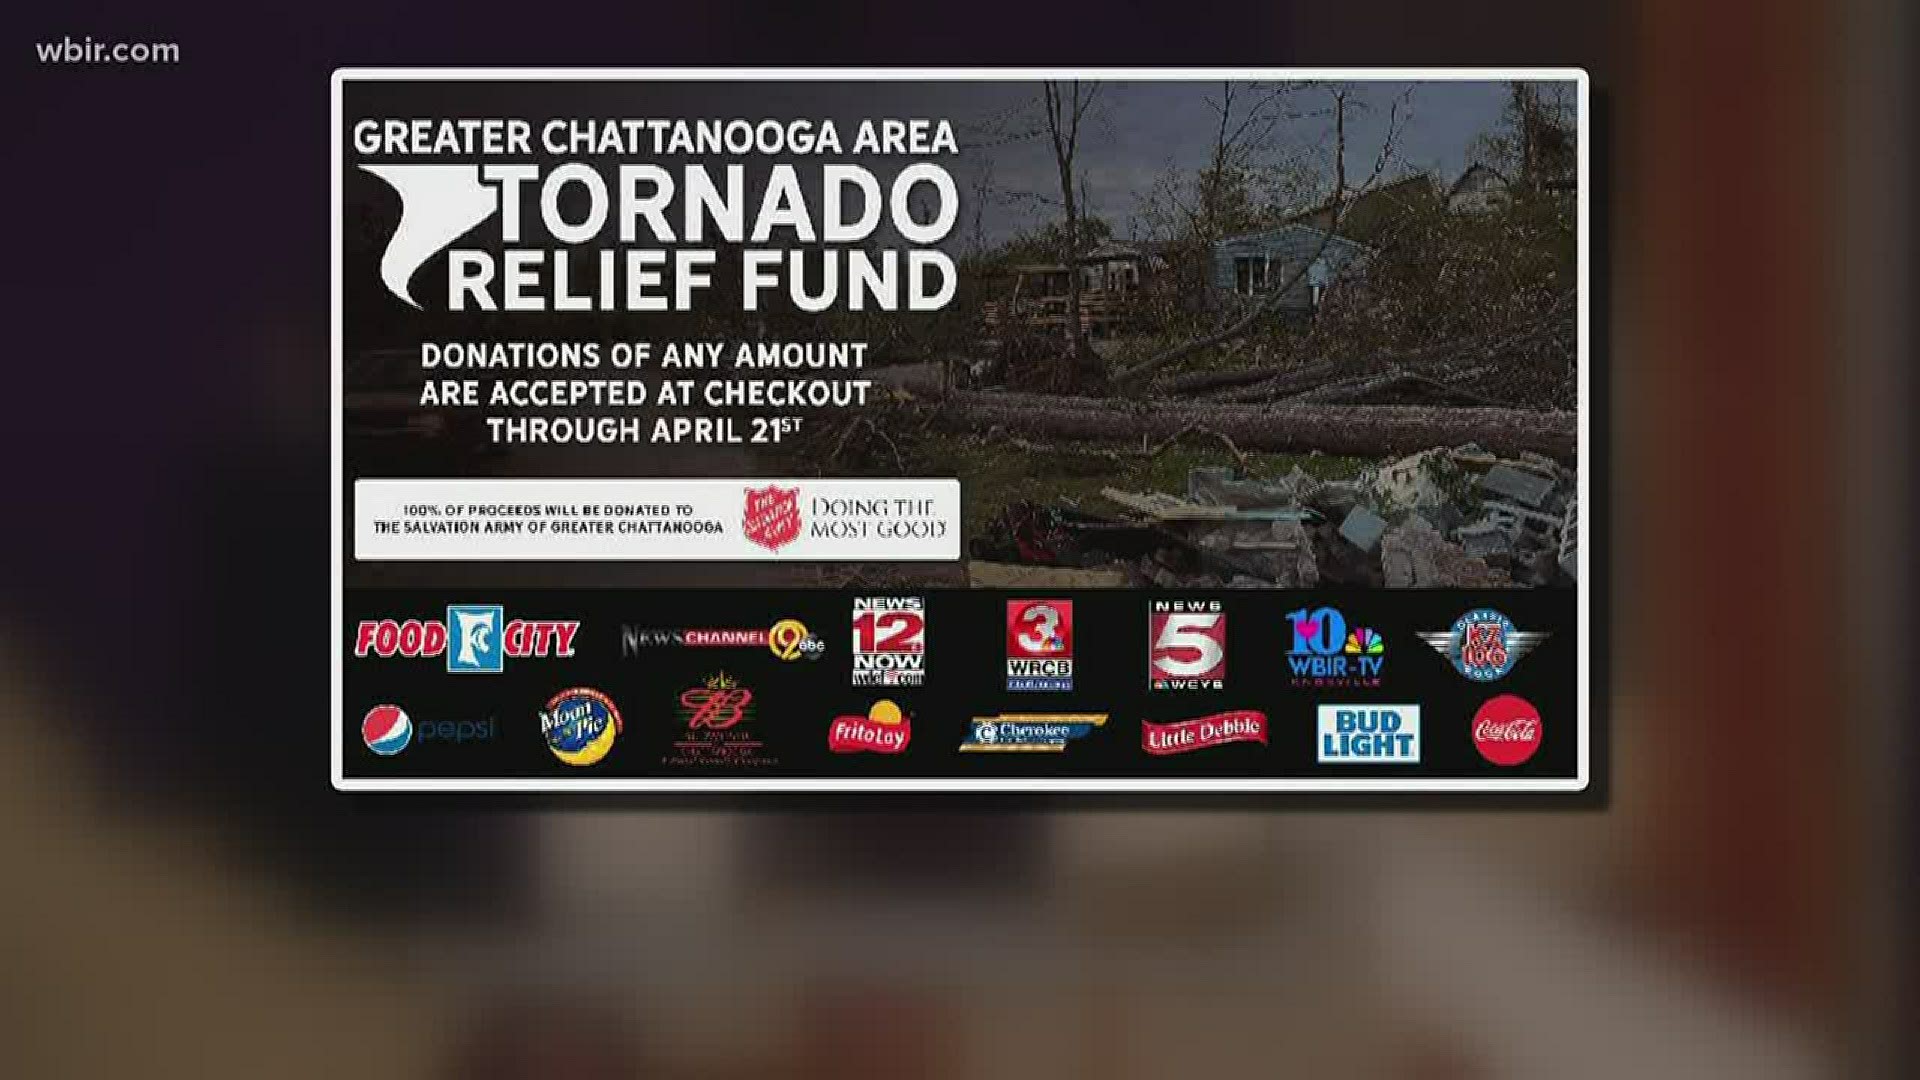 When you give today at Food City, 100% of the funds raised will go to The Salvation Army of Greater Chattanooga to assist with the relief efforts.